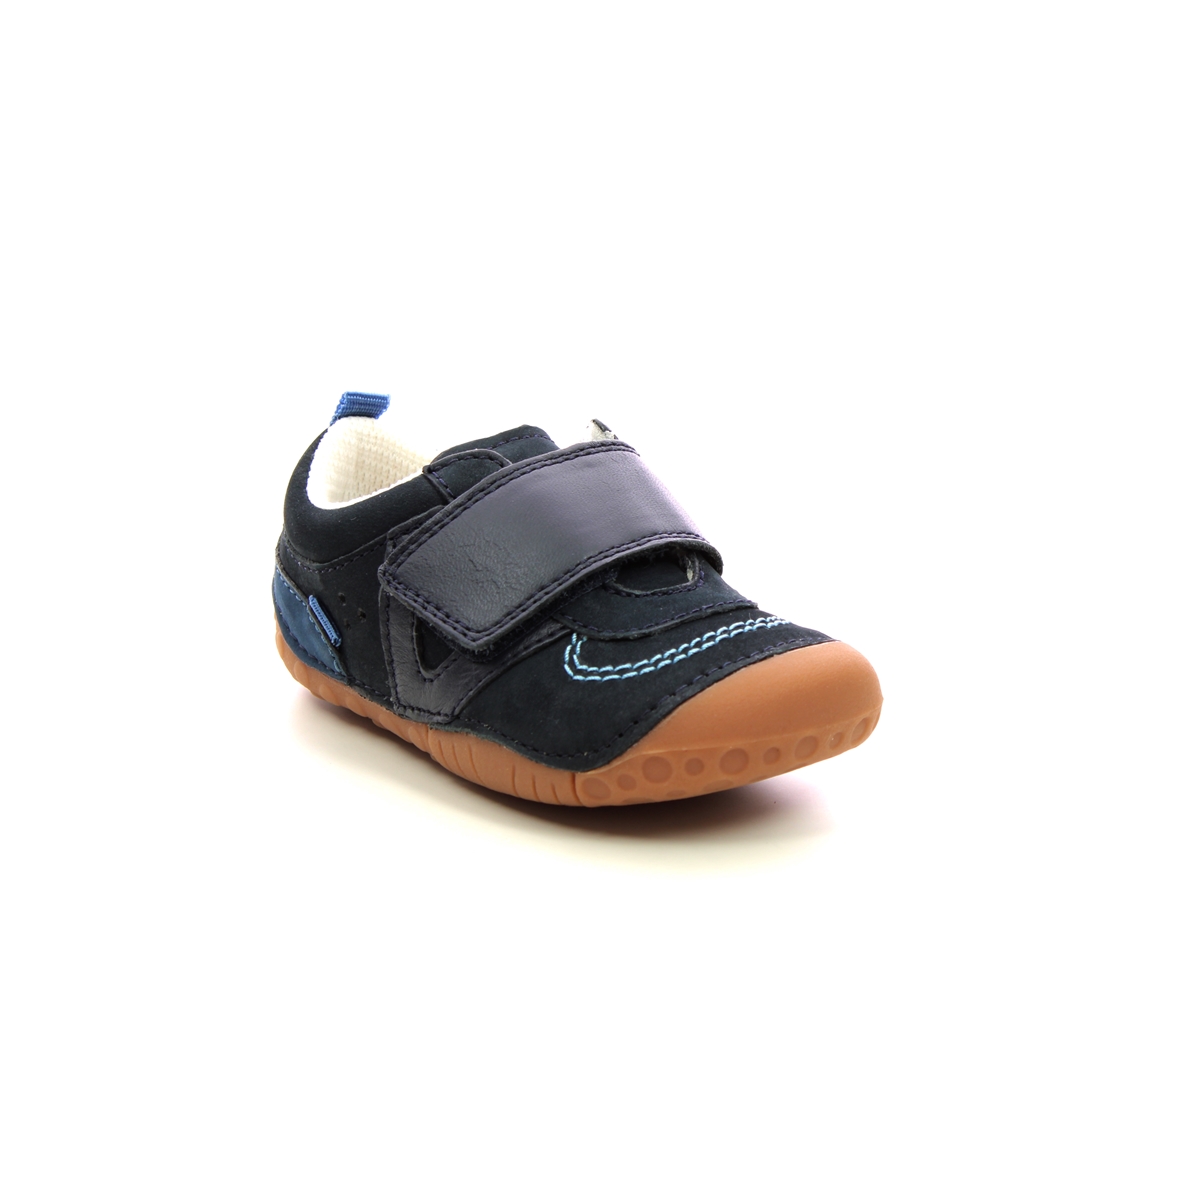 Start Rite - Shuffle 1V In Navy Leather 0786-97G In Size 4.5 In Plain Navy Leather Boys First And Toddler Shoes  In Navy Leather